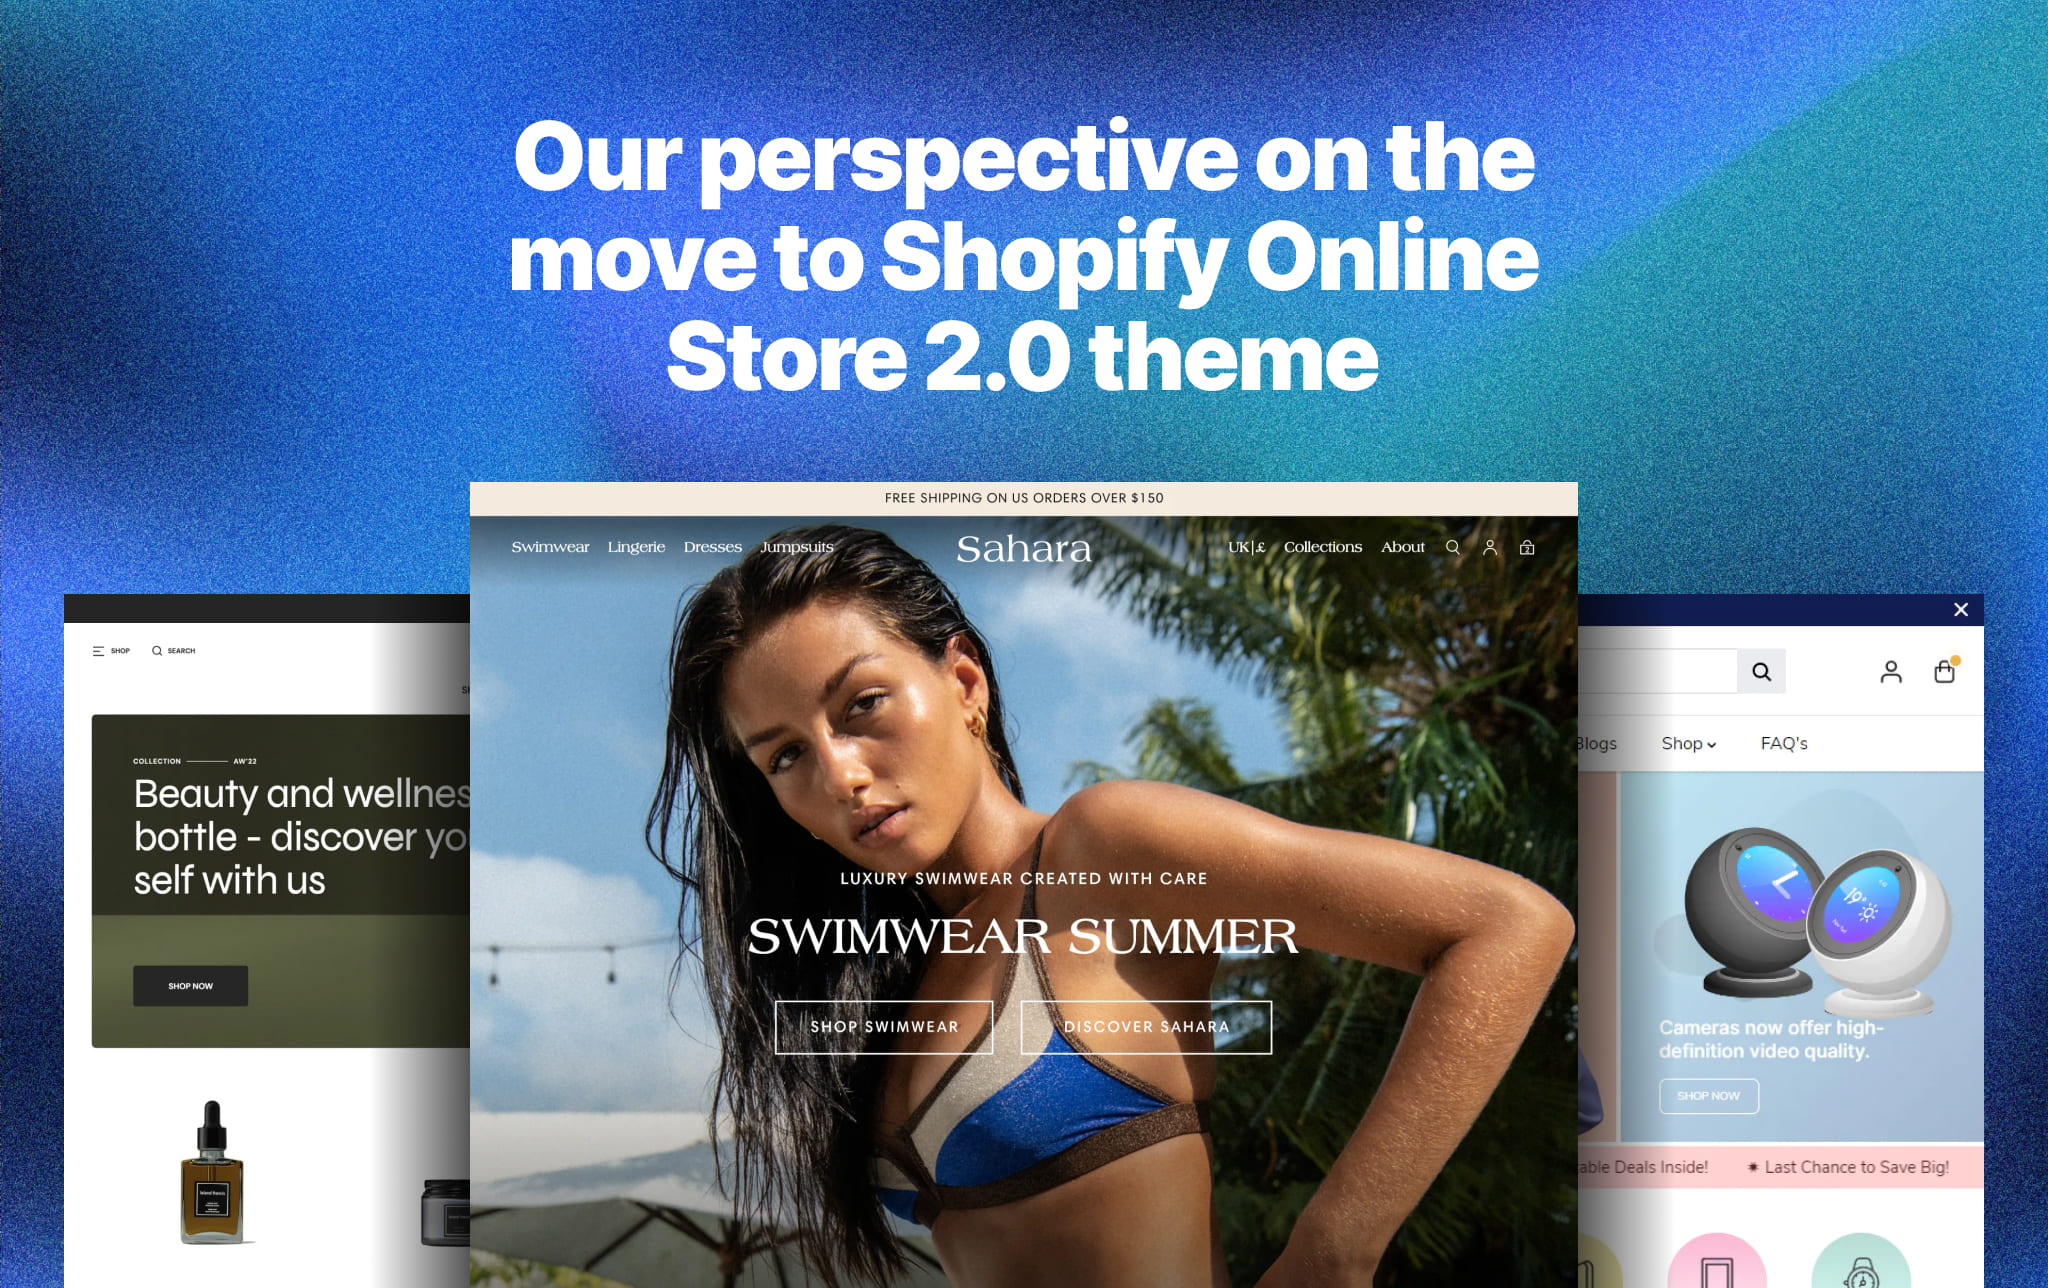 Shopify Online Store 2.0 theme upgrade: expert perspective